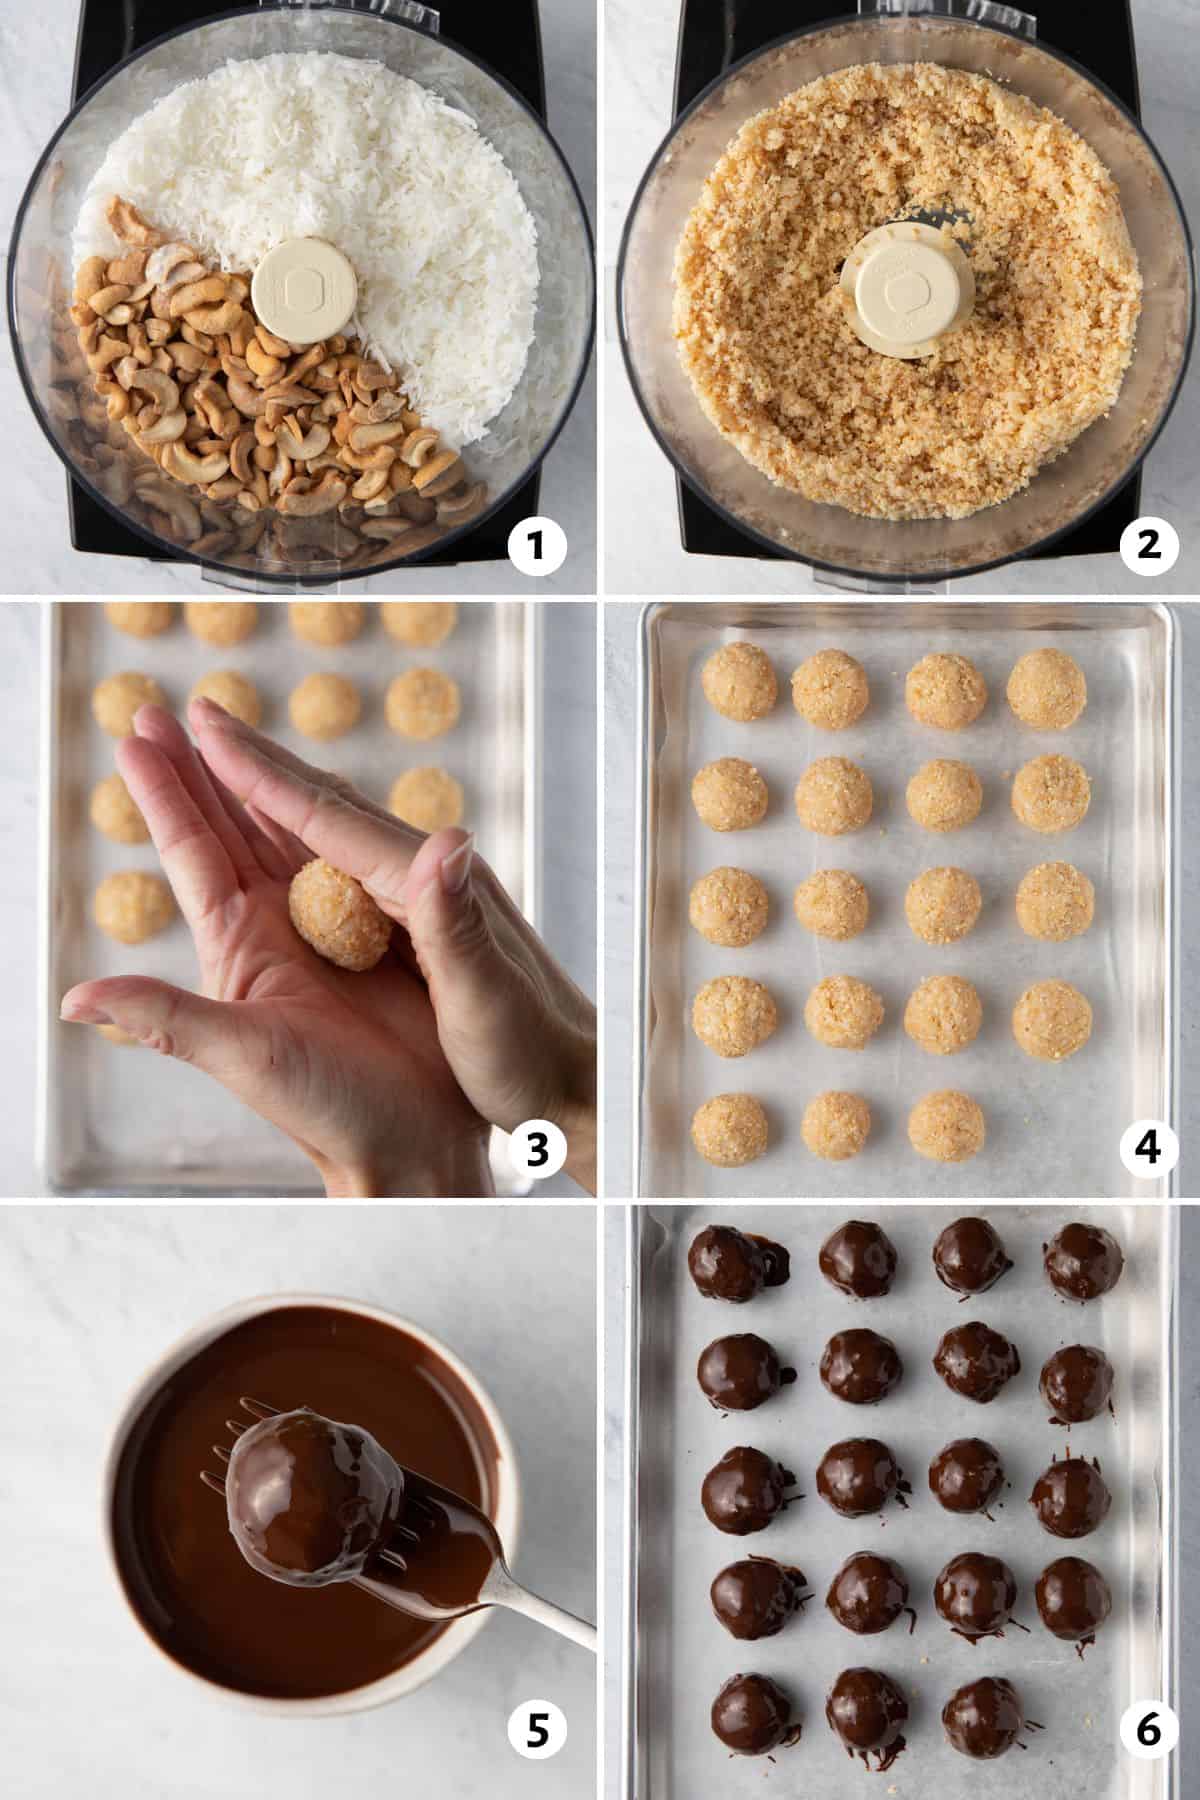 6 image collage before and after processing recipe ingredients in the bowl of a food processor, 3- rolling dough with palms, 4- dough balls on a parchment lined paper, 5- dipping one into melted chocolate, 6- chocolate coated cookie dough balls on sheet pan.